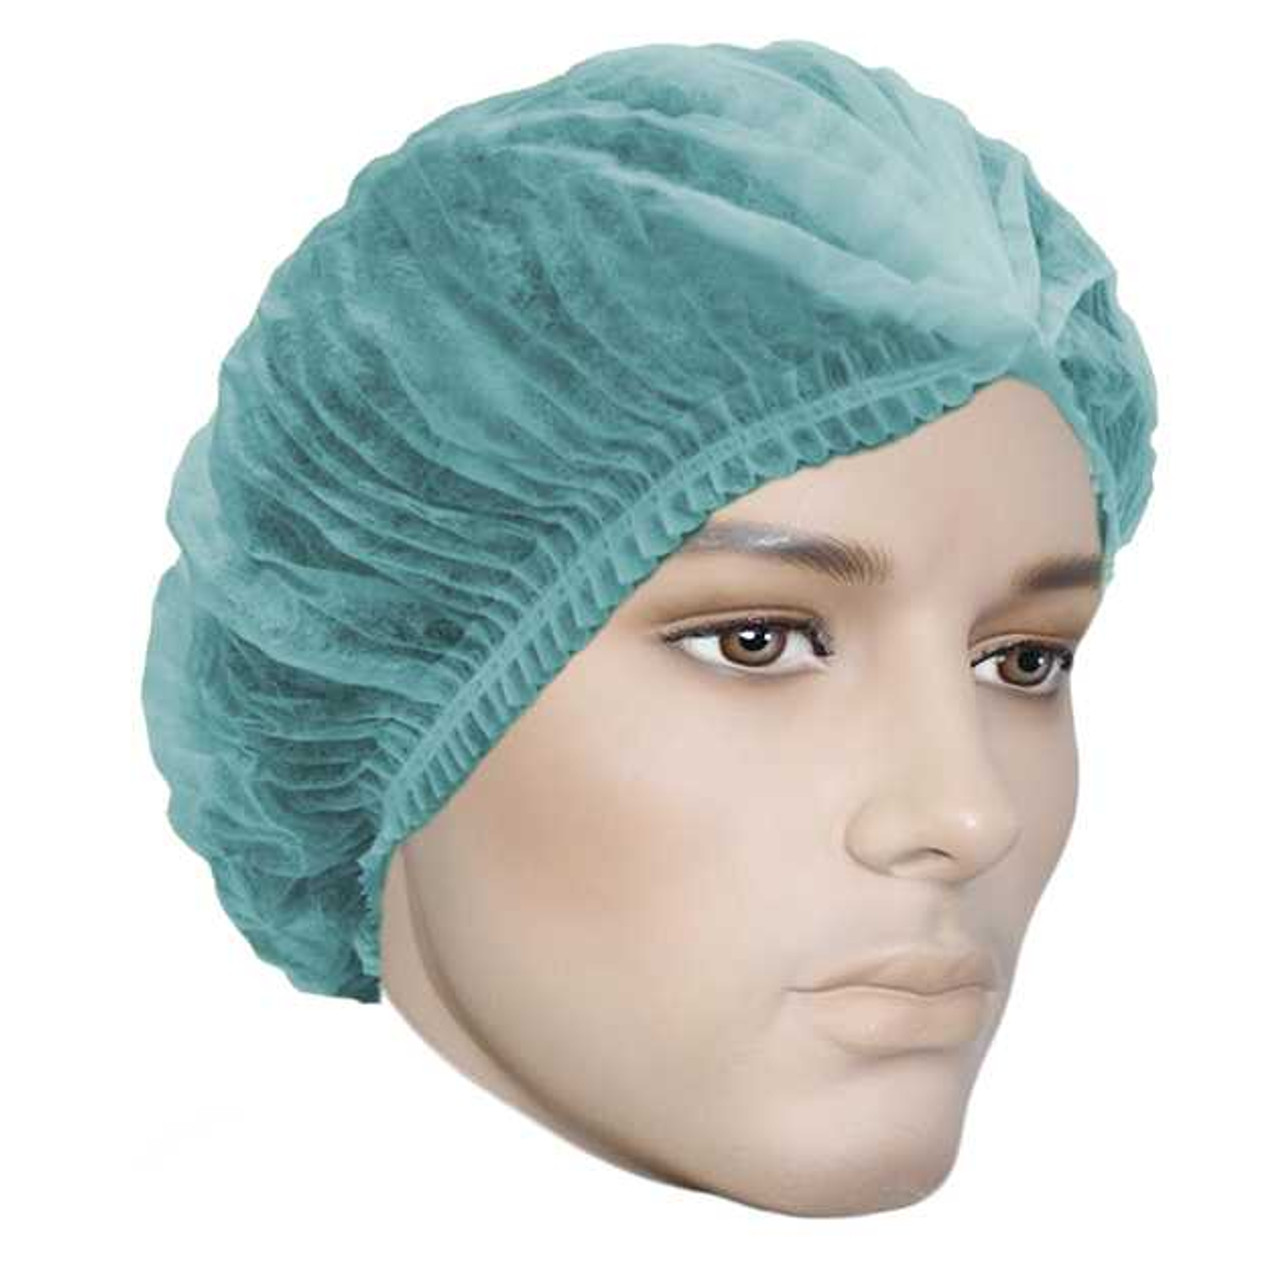 Cova-Cap™ Pleated Bouffant Cap, Available in White, Blue, Yellow, Green, or Pink (1,000 bouffants / case)